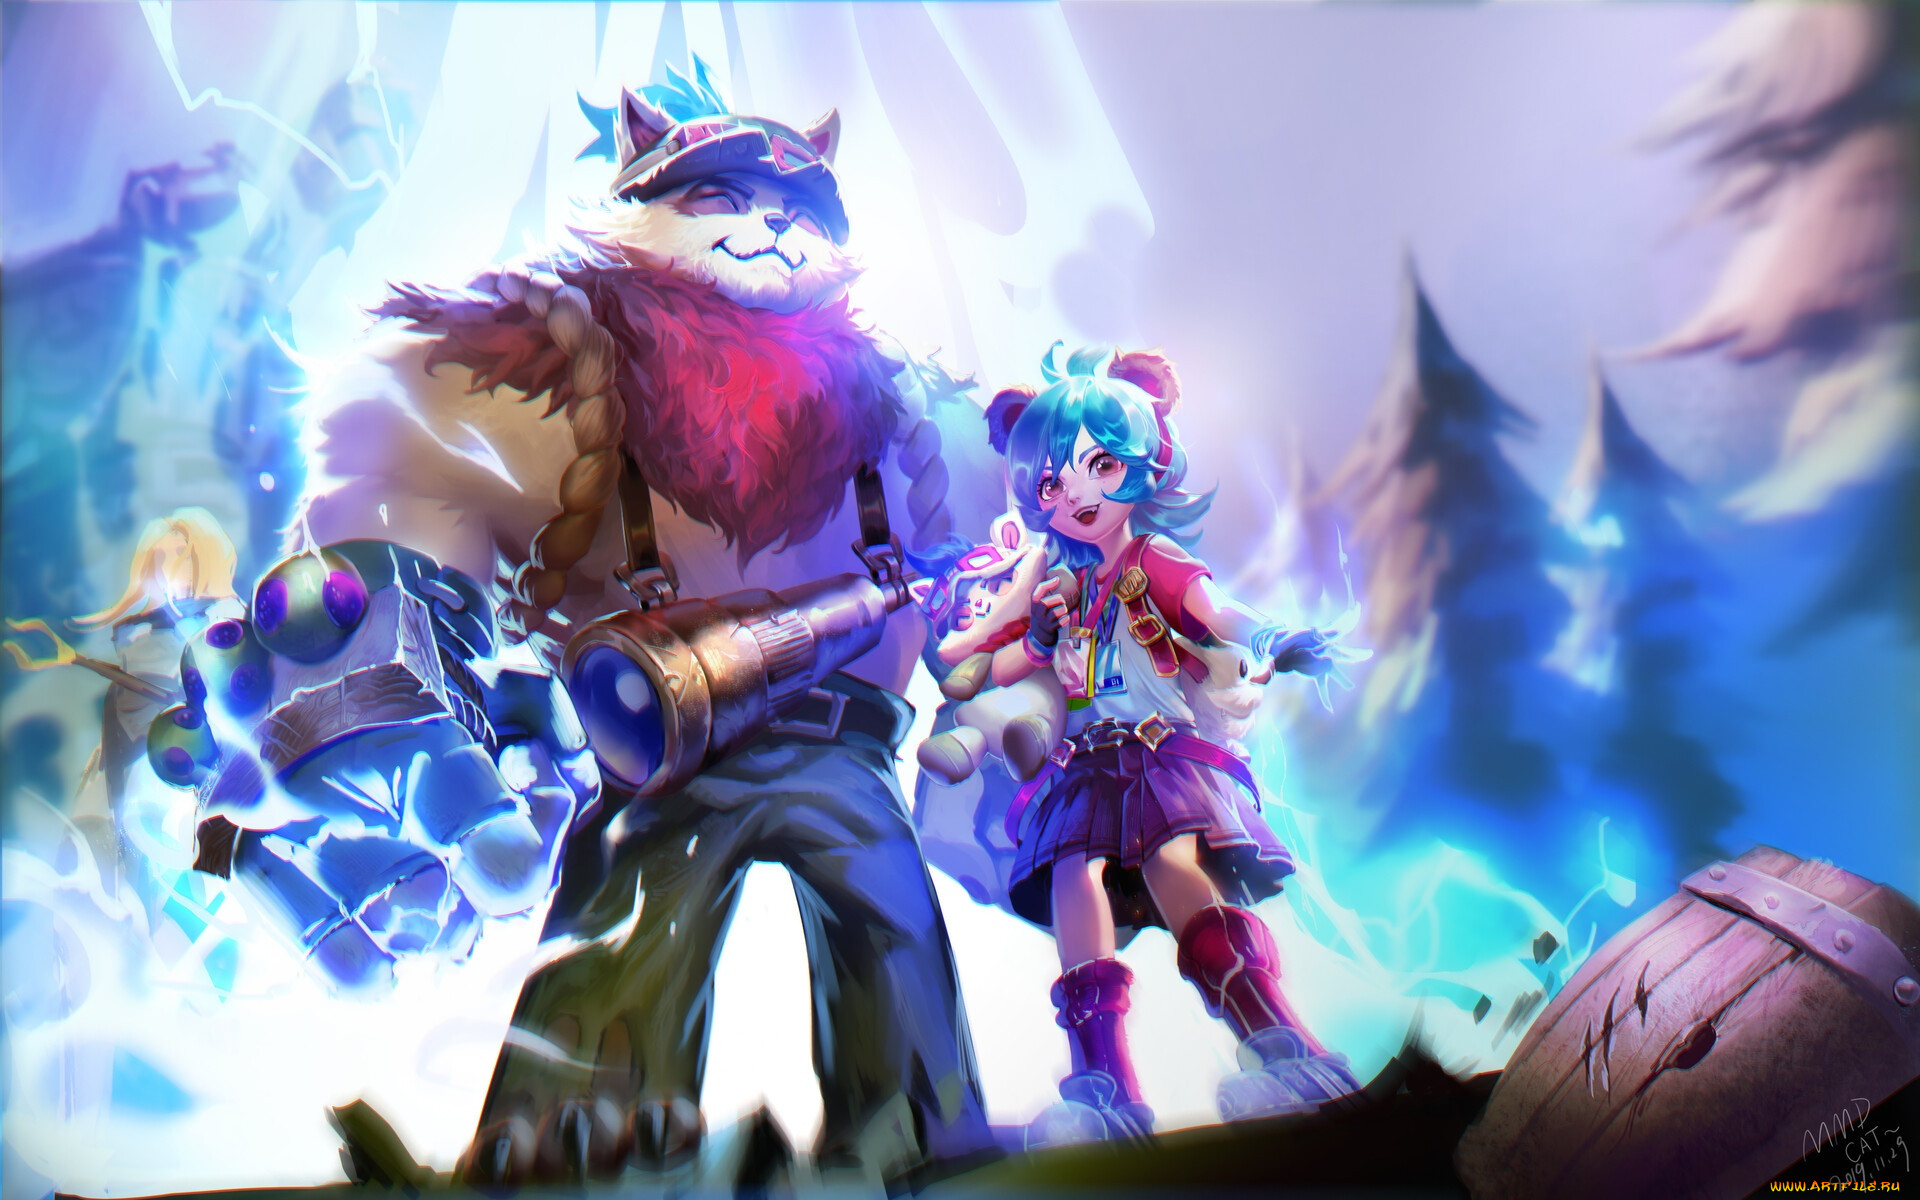  , league of legends, , , , teemo, annie